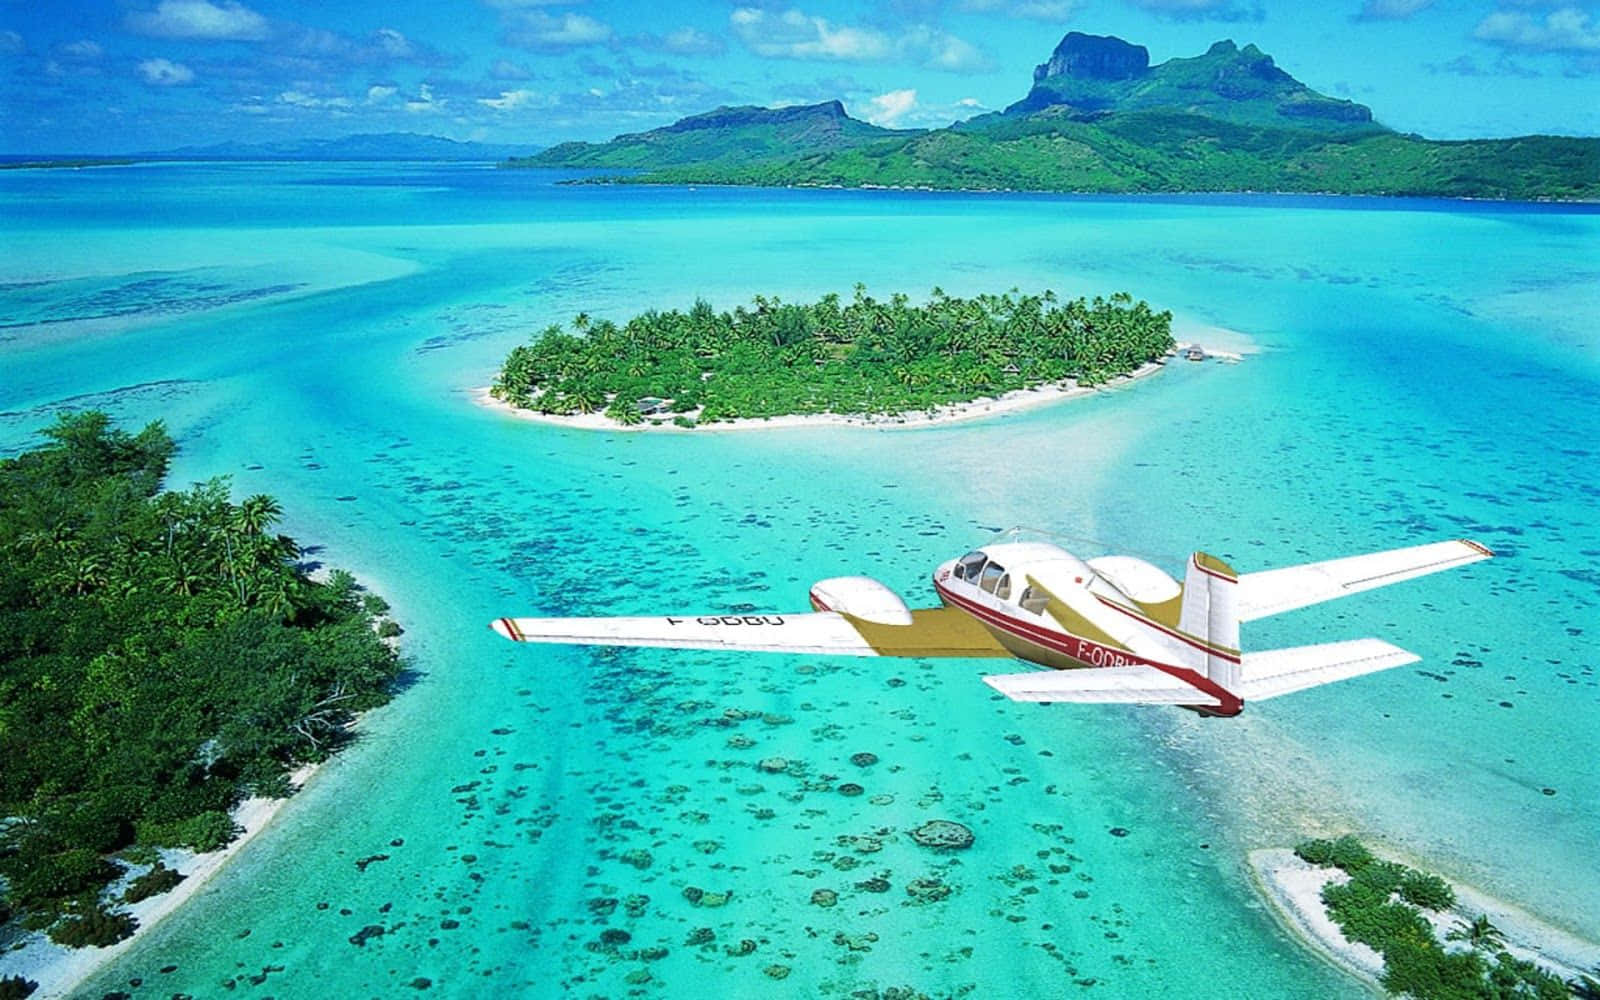 A Small Plane Flying Over A Tropical Island